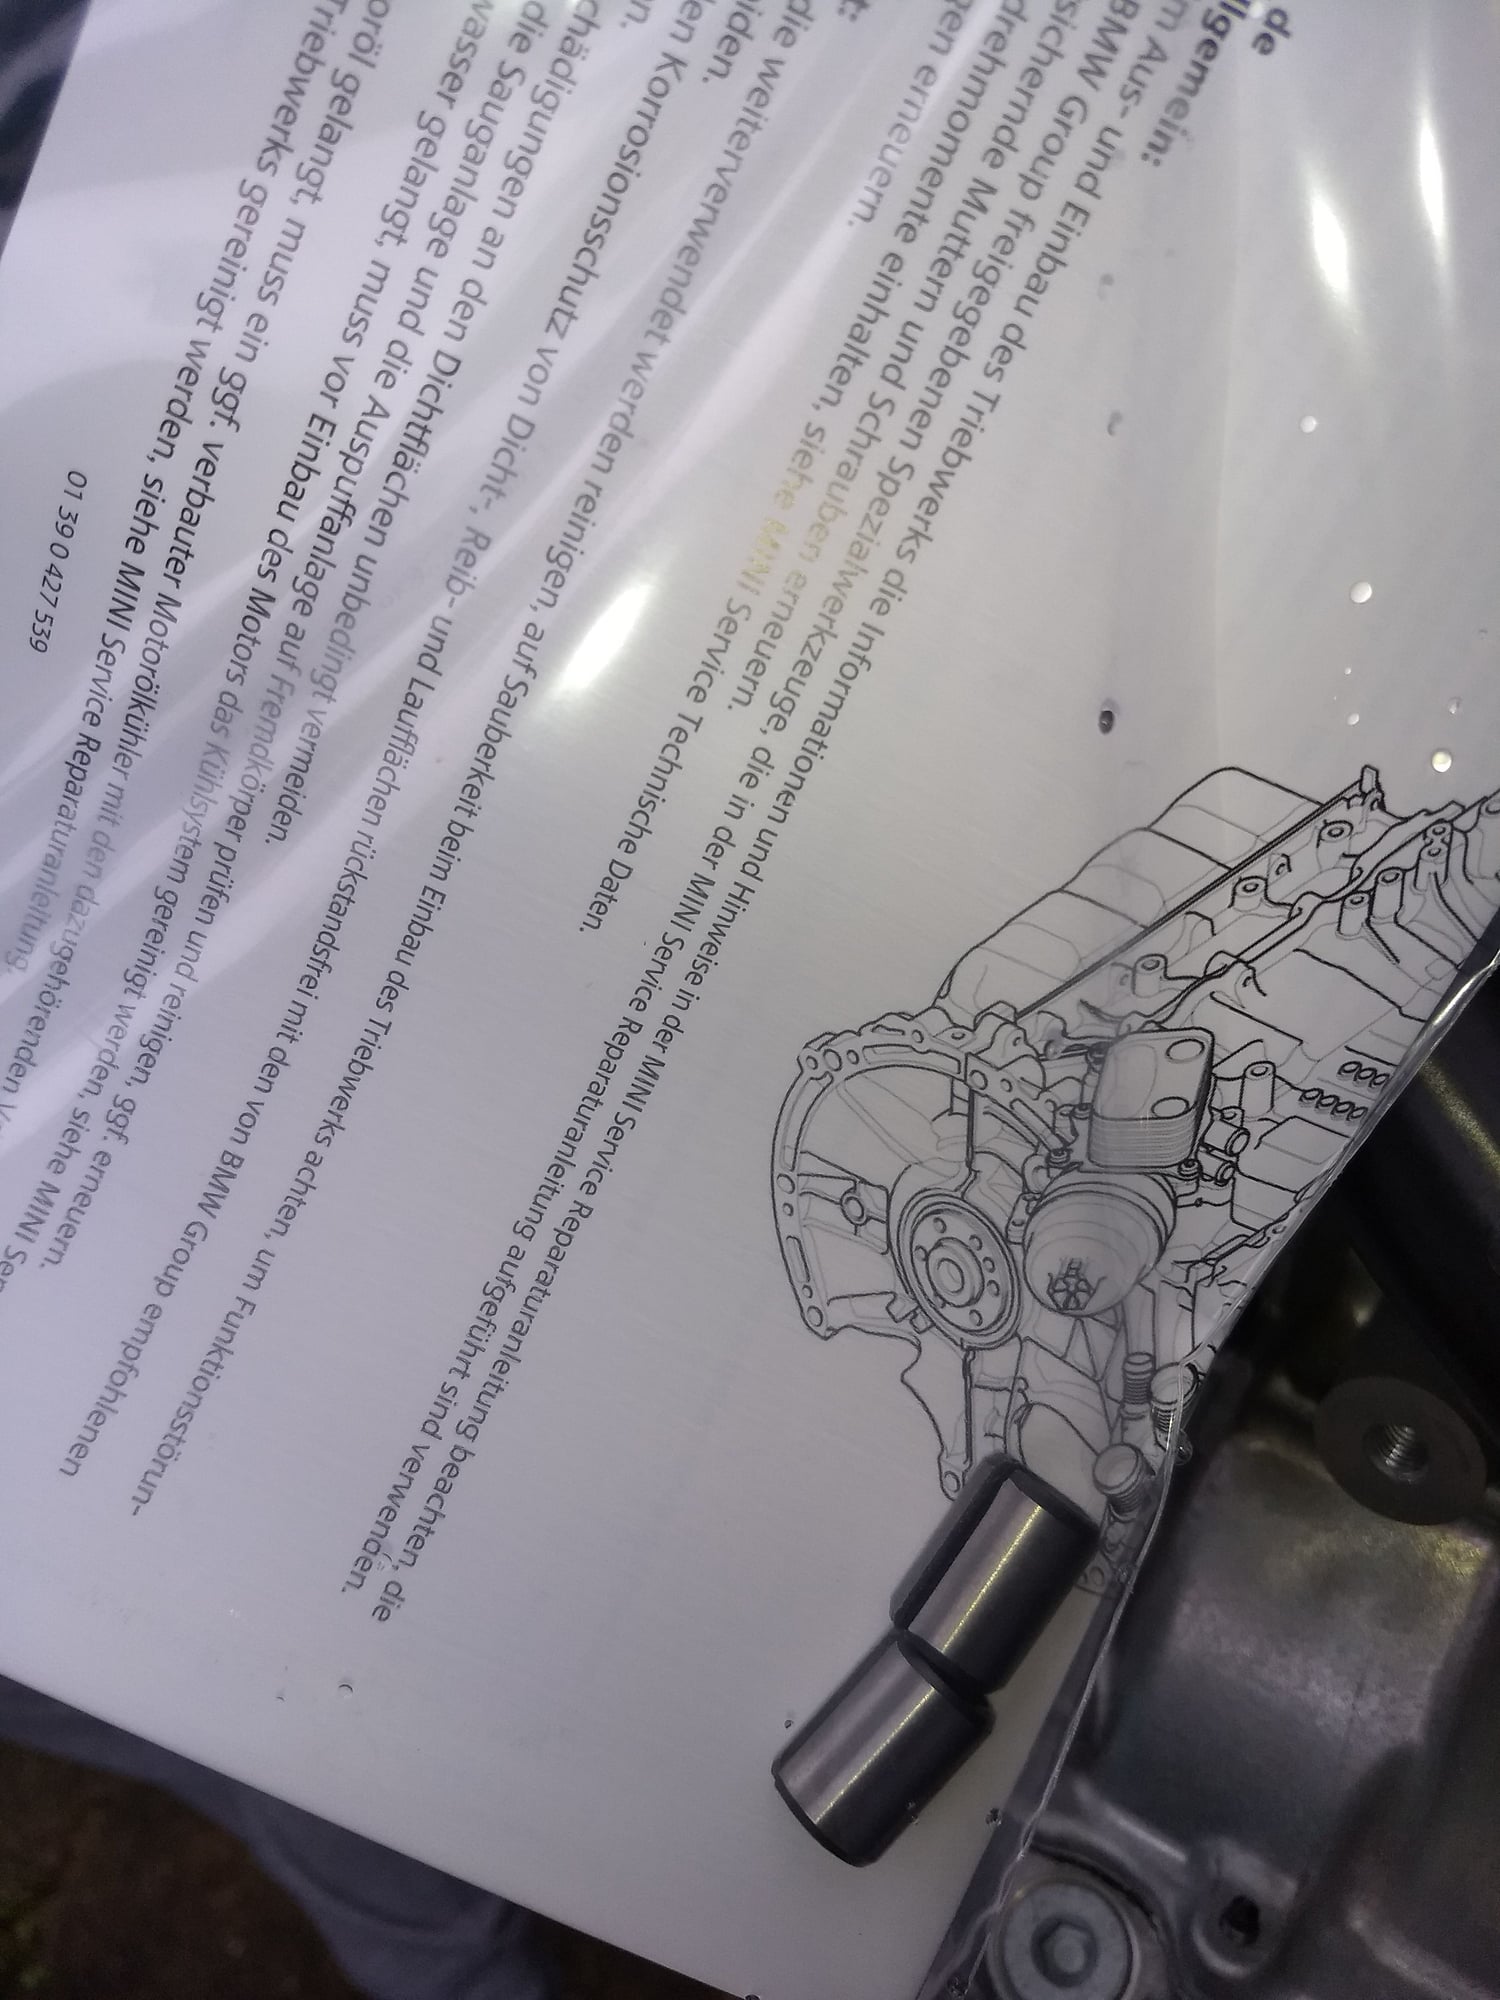 R56 08 cooper s engine removal - Page 3 - North American Motoring